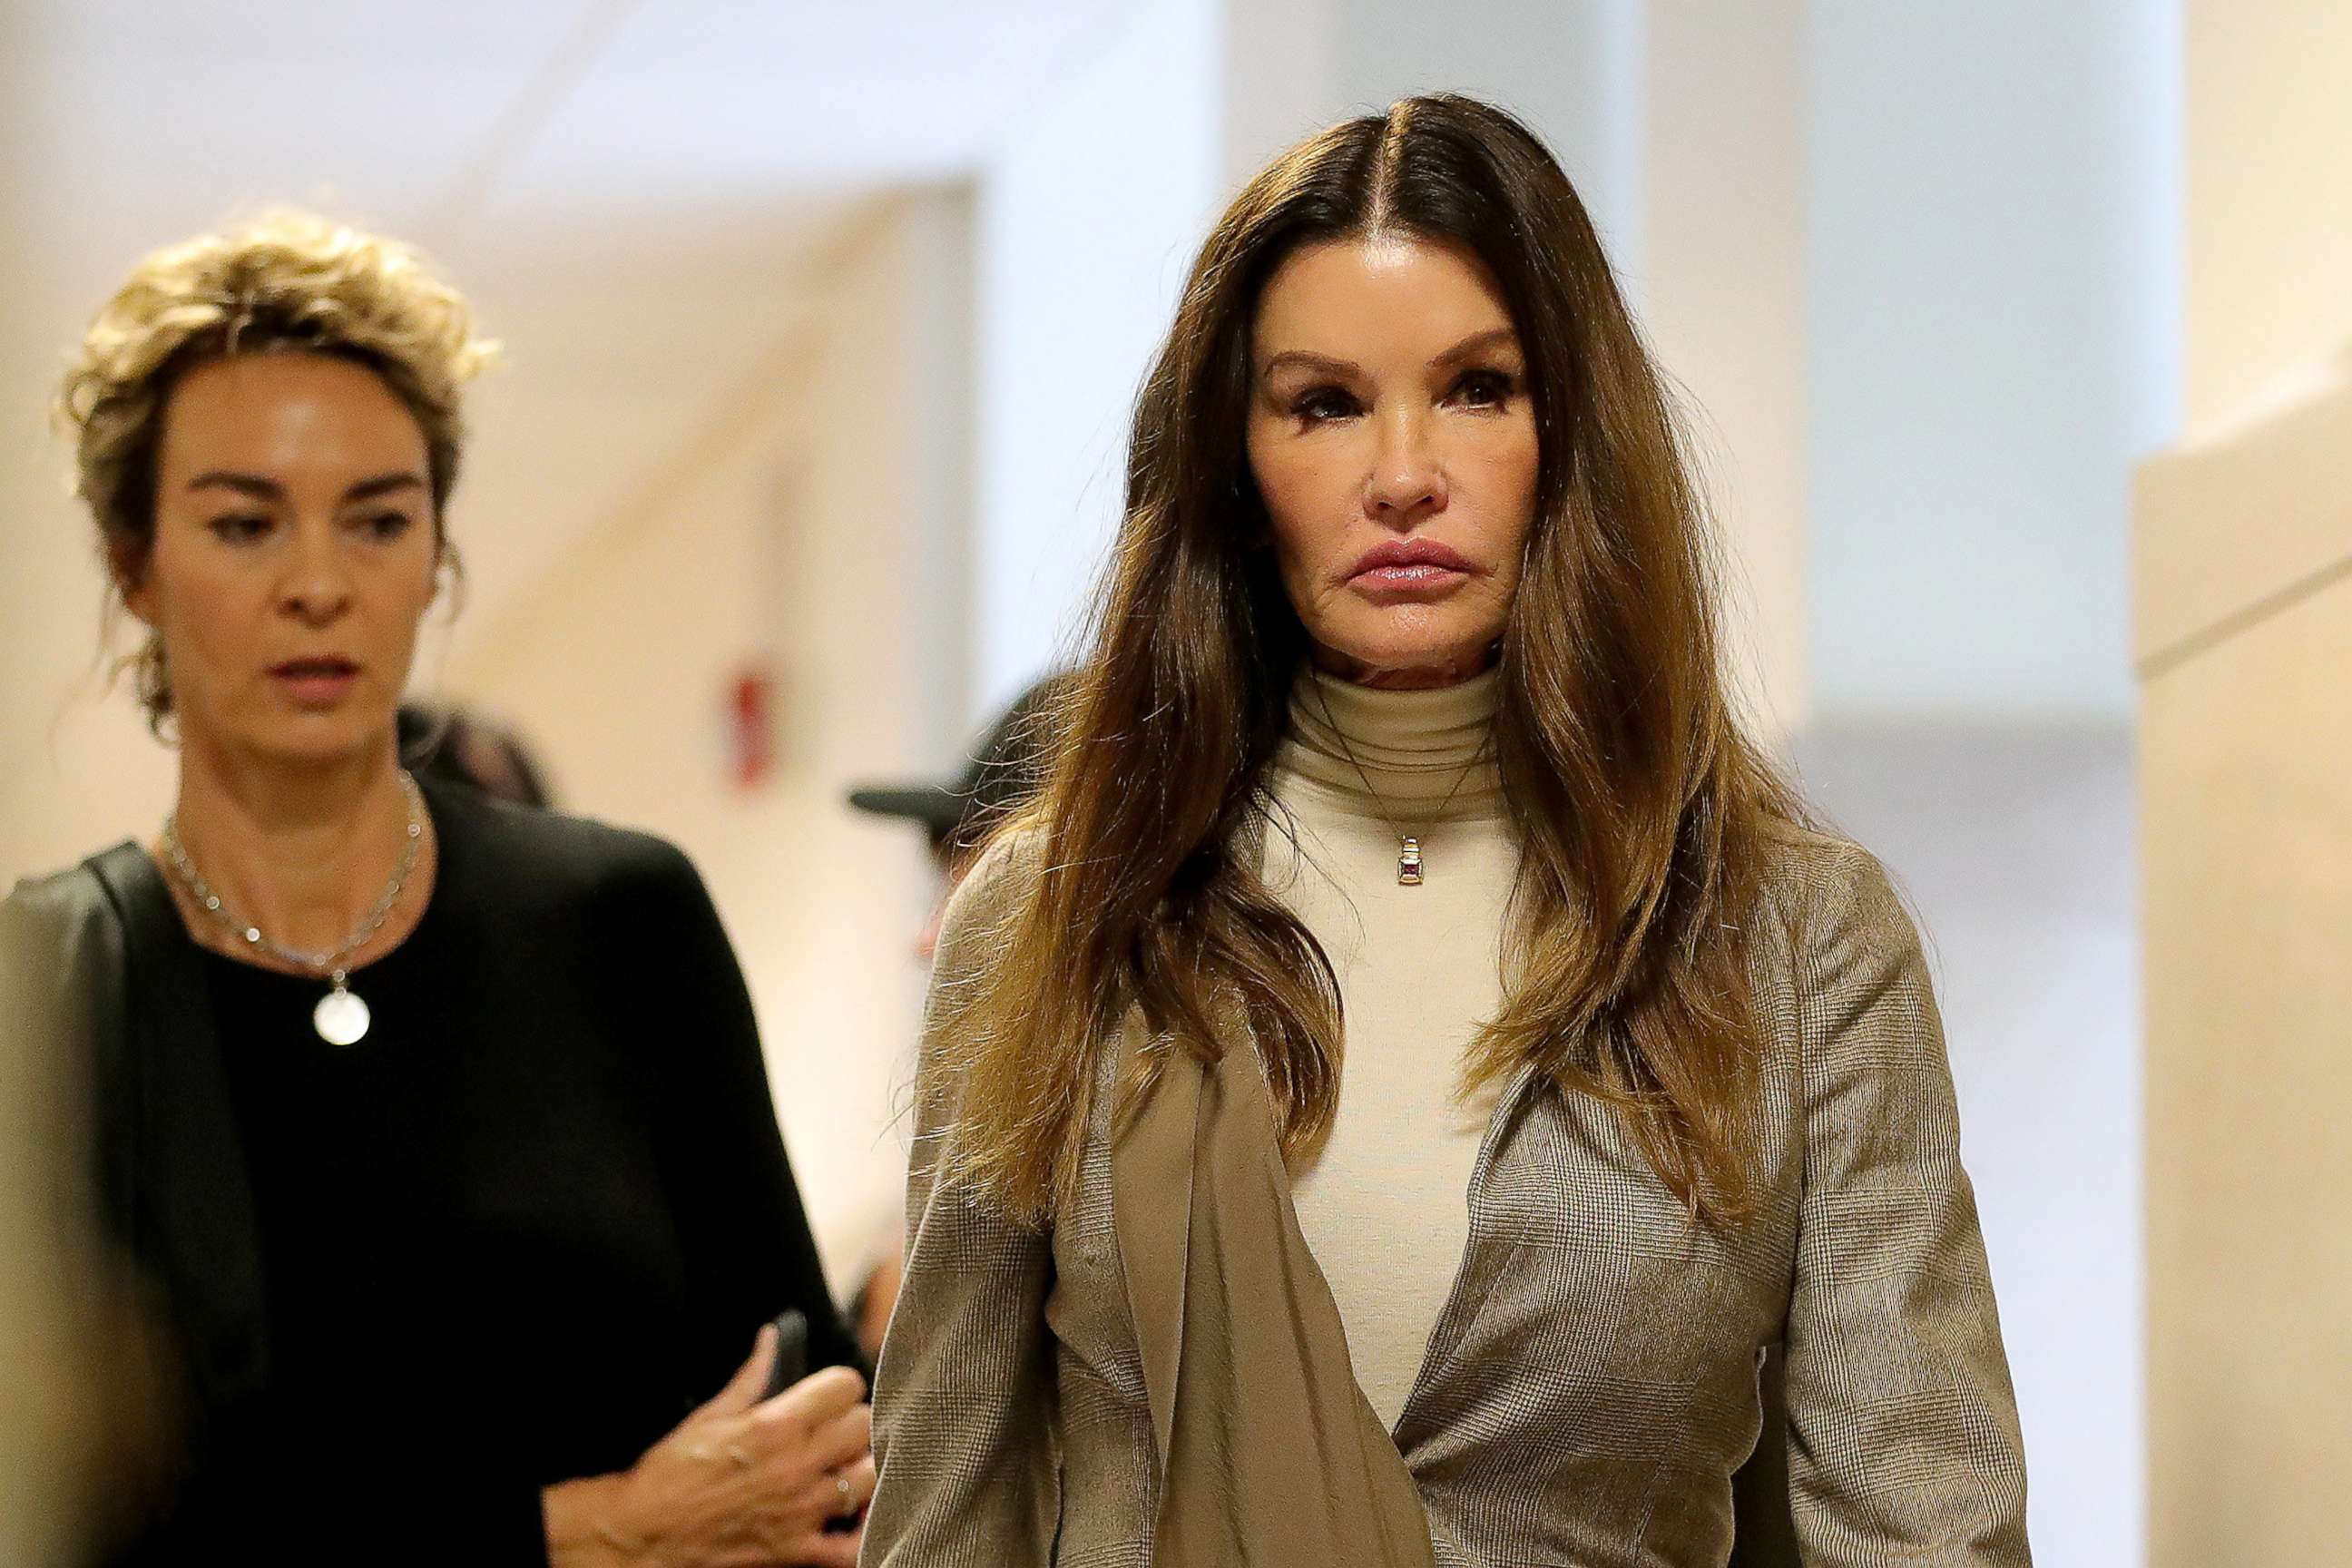 PHOTO: Former model Janice Dickinson arrives at the sentencing hearing for the sexual assault trial of  Bill Cosby at the Montgomery County Courthouse in Norristown, Pa., Sept. 24, 2018.